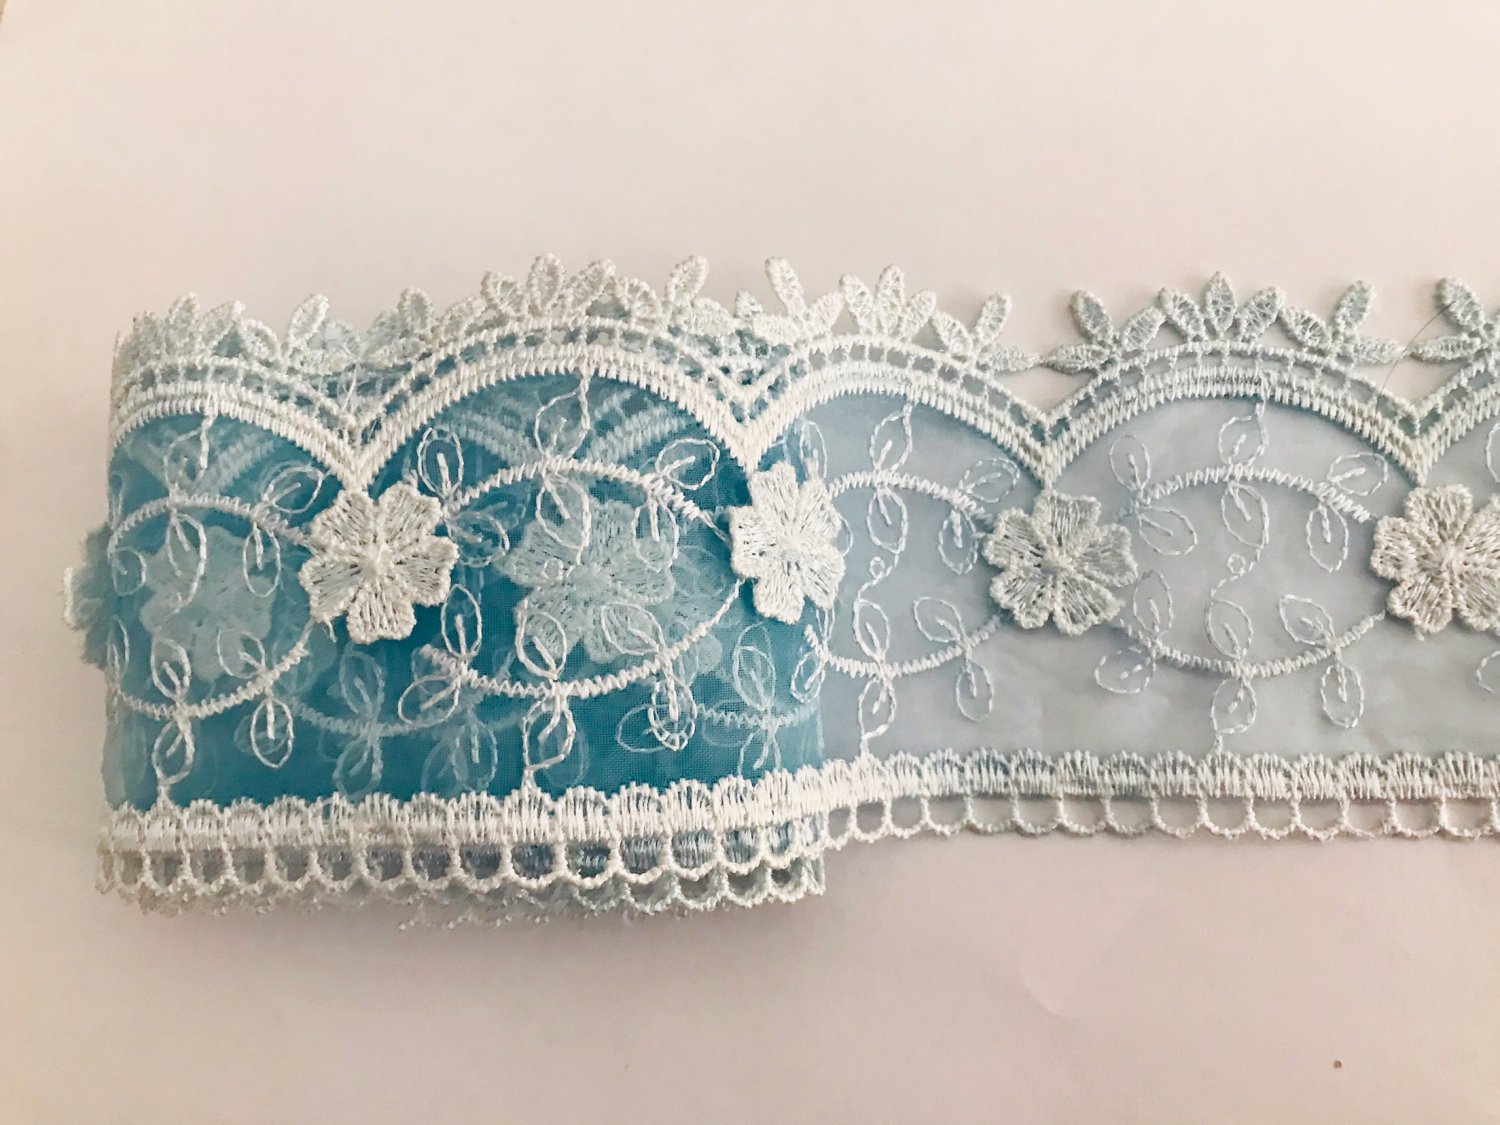 3.15" x 1.4 yds Lace Trim Embroidered Floral Mesh Blue ～ Fast Delivery as Air Lettermail